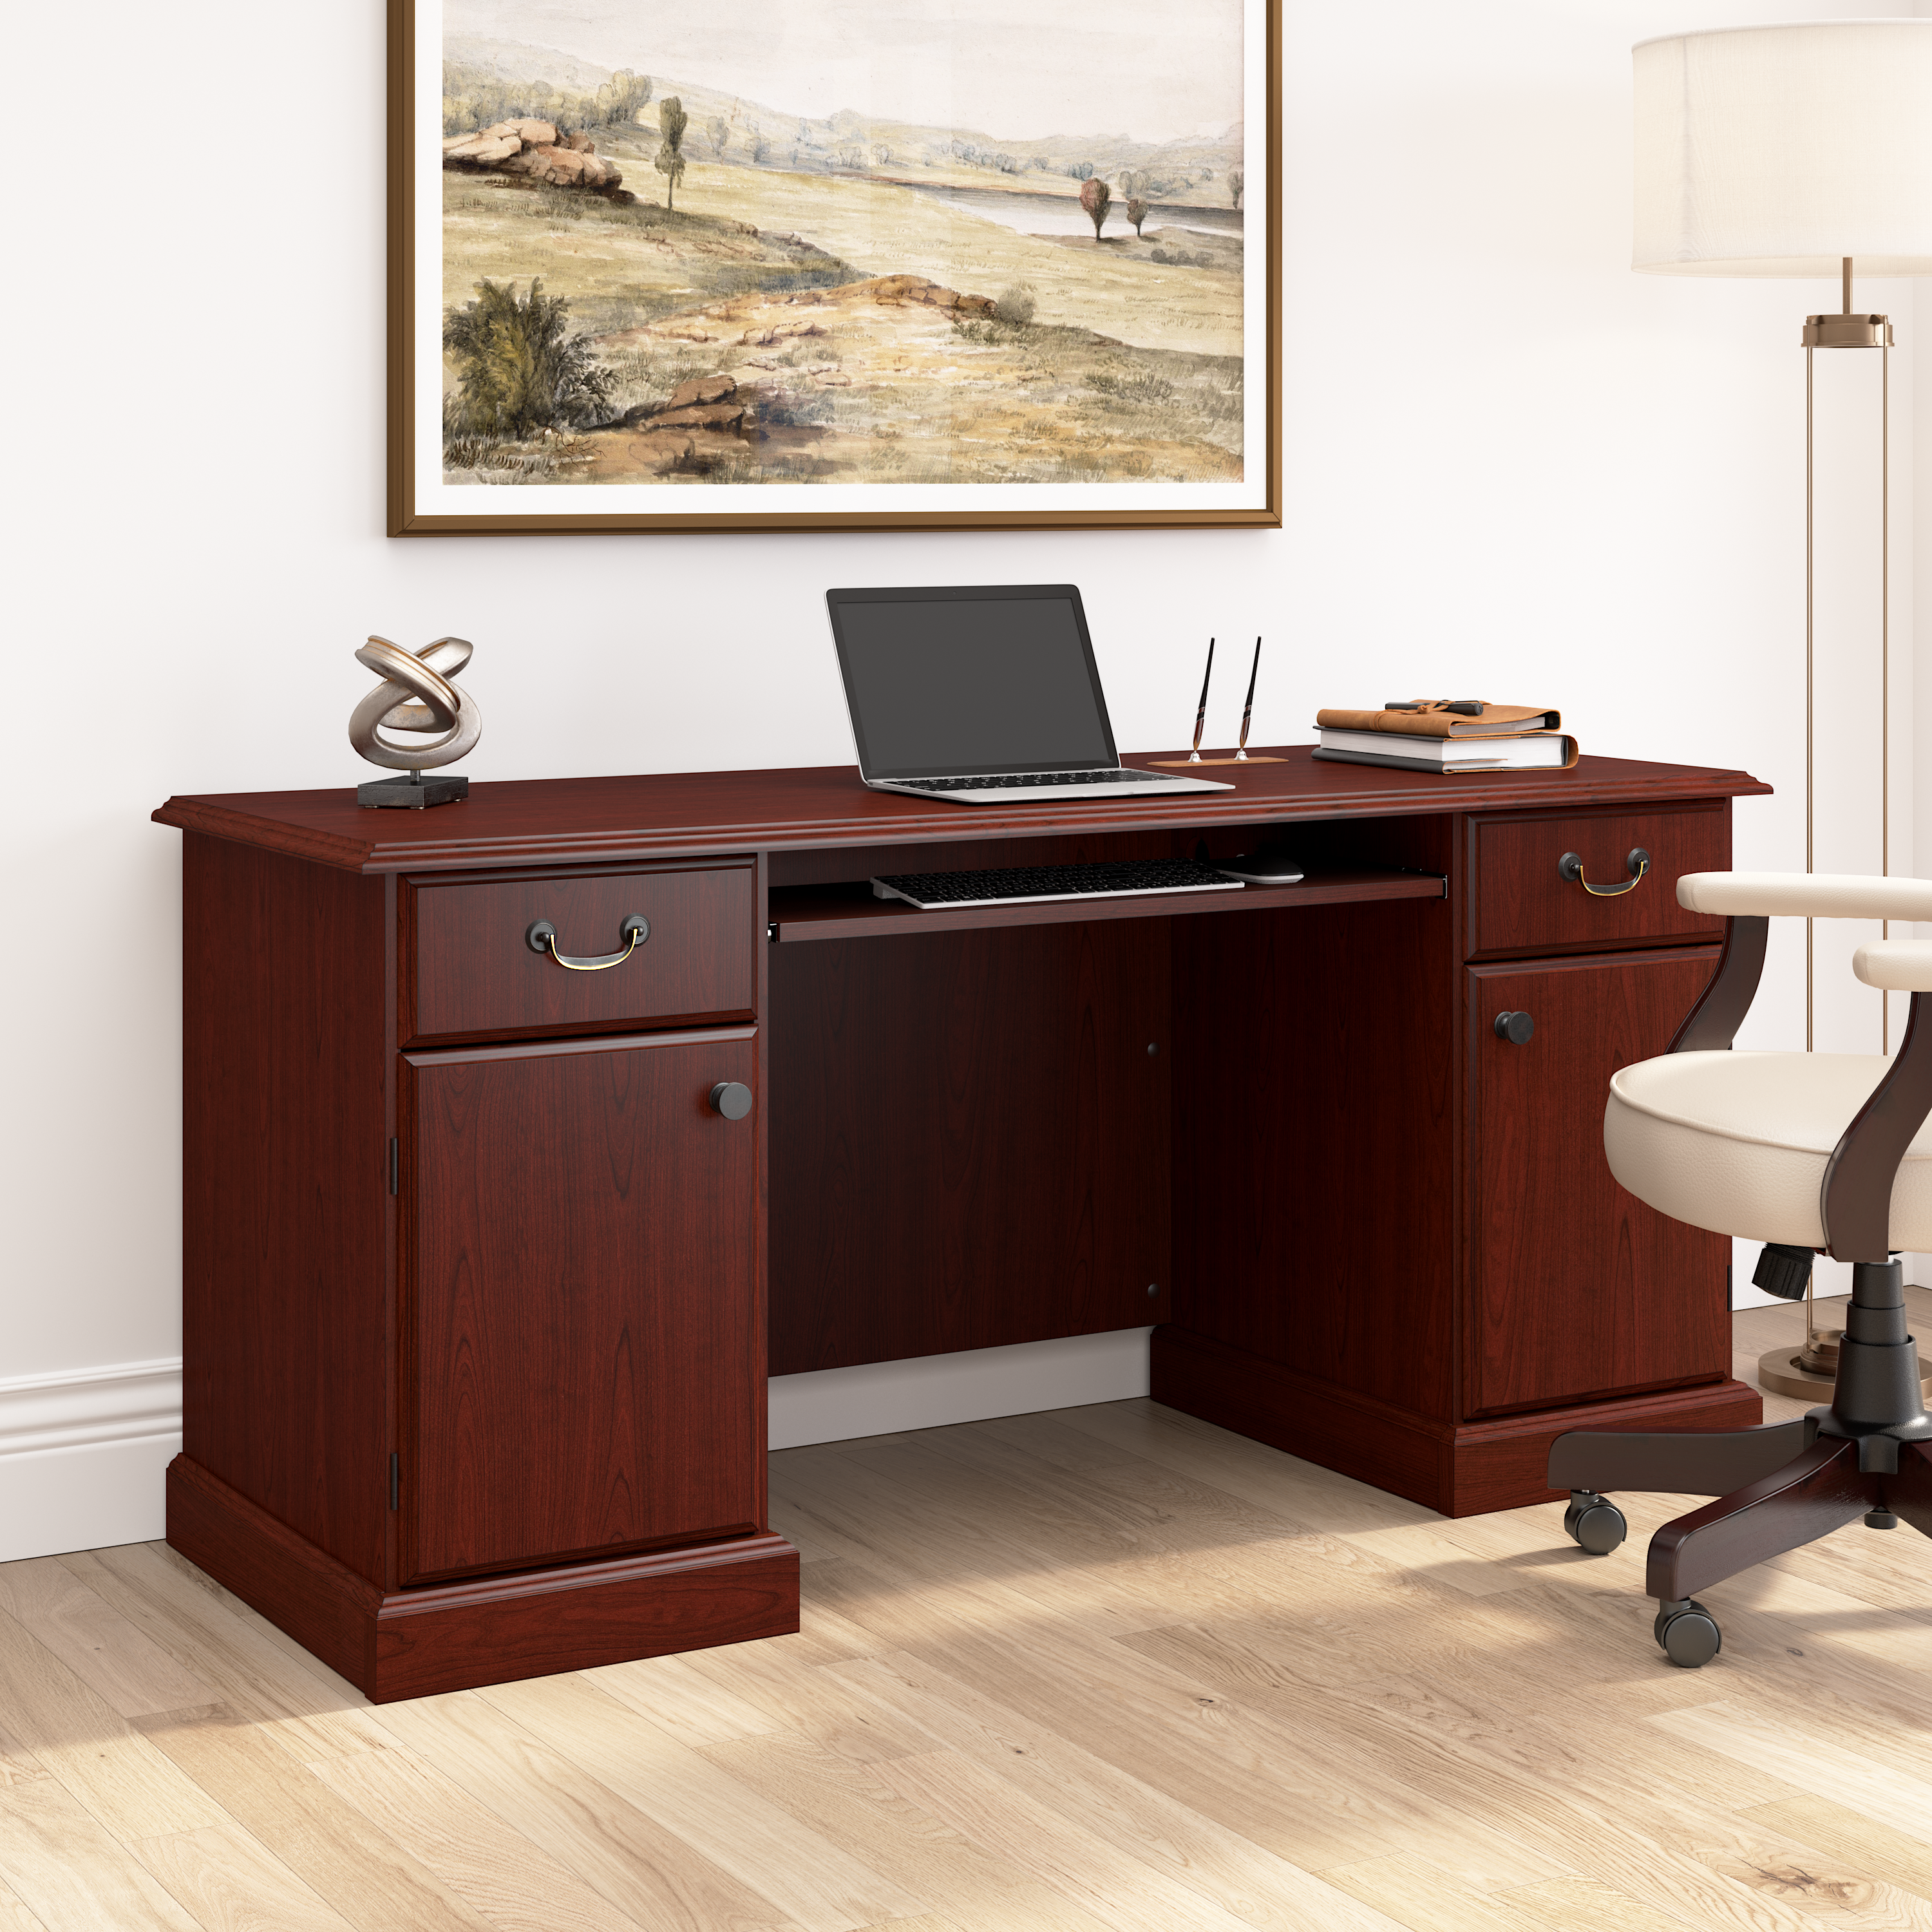 Shop Bush Business Furniture Arlington Computer Desk with Storage and Keyboard Tray 01 WC65510-03K #color_harvest cherry